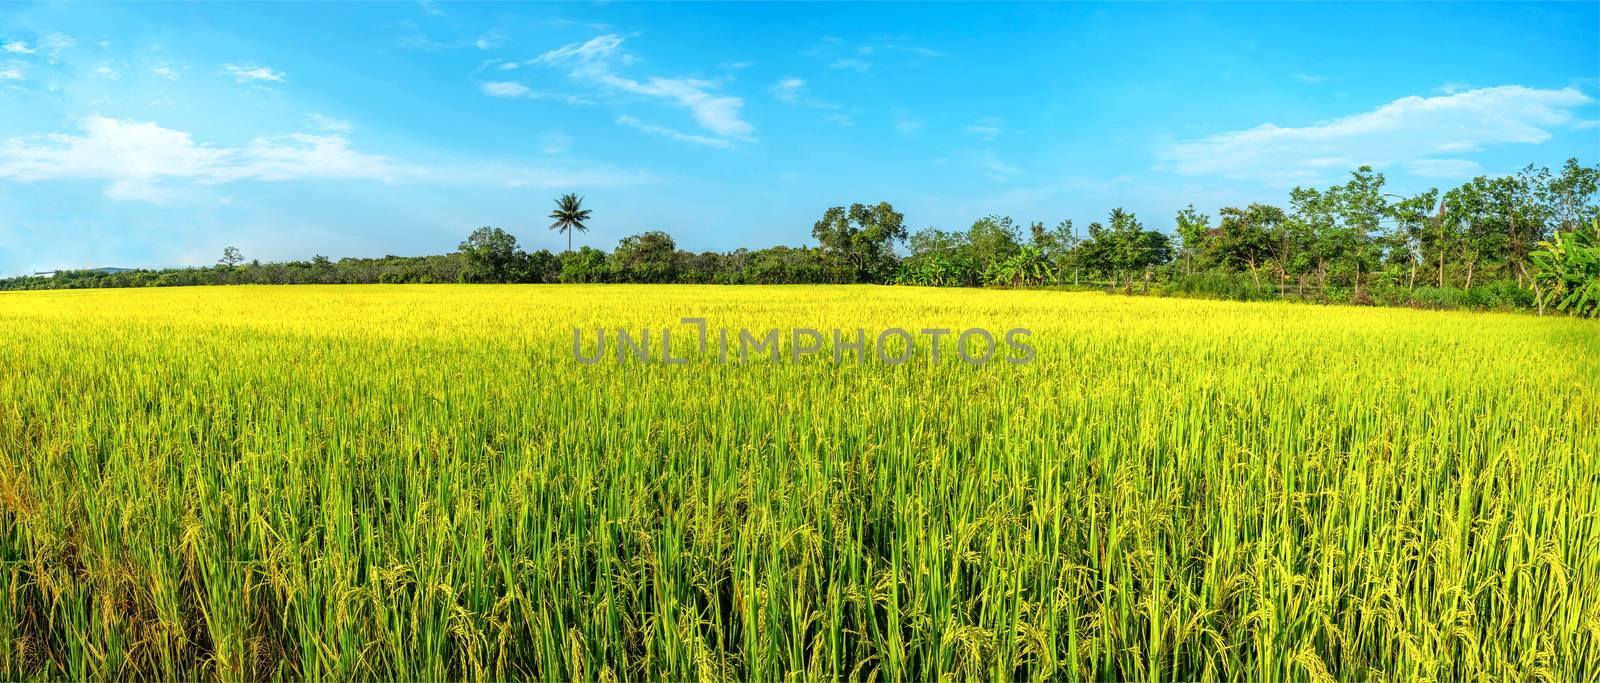 a filed of ripen rice corps witn golden and green color in the early morning sun, panoramic view